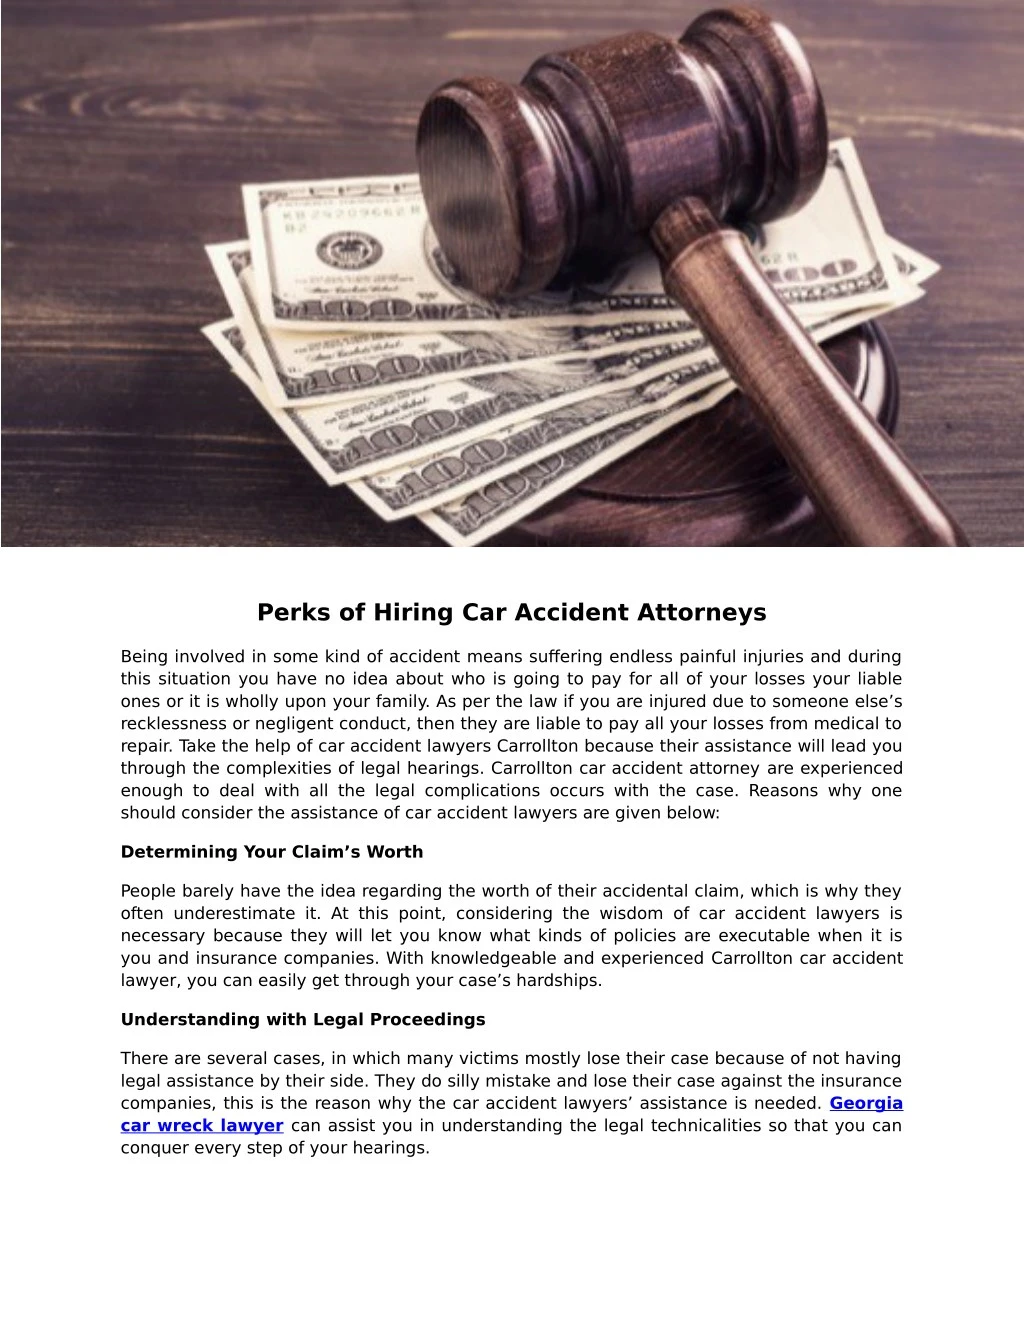 perks of hiring car accident attorneys